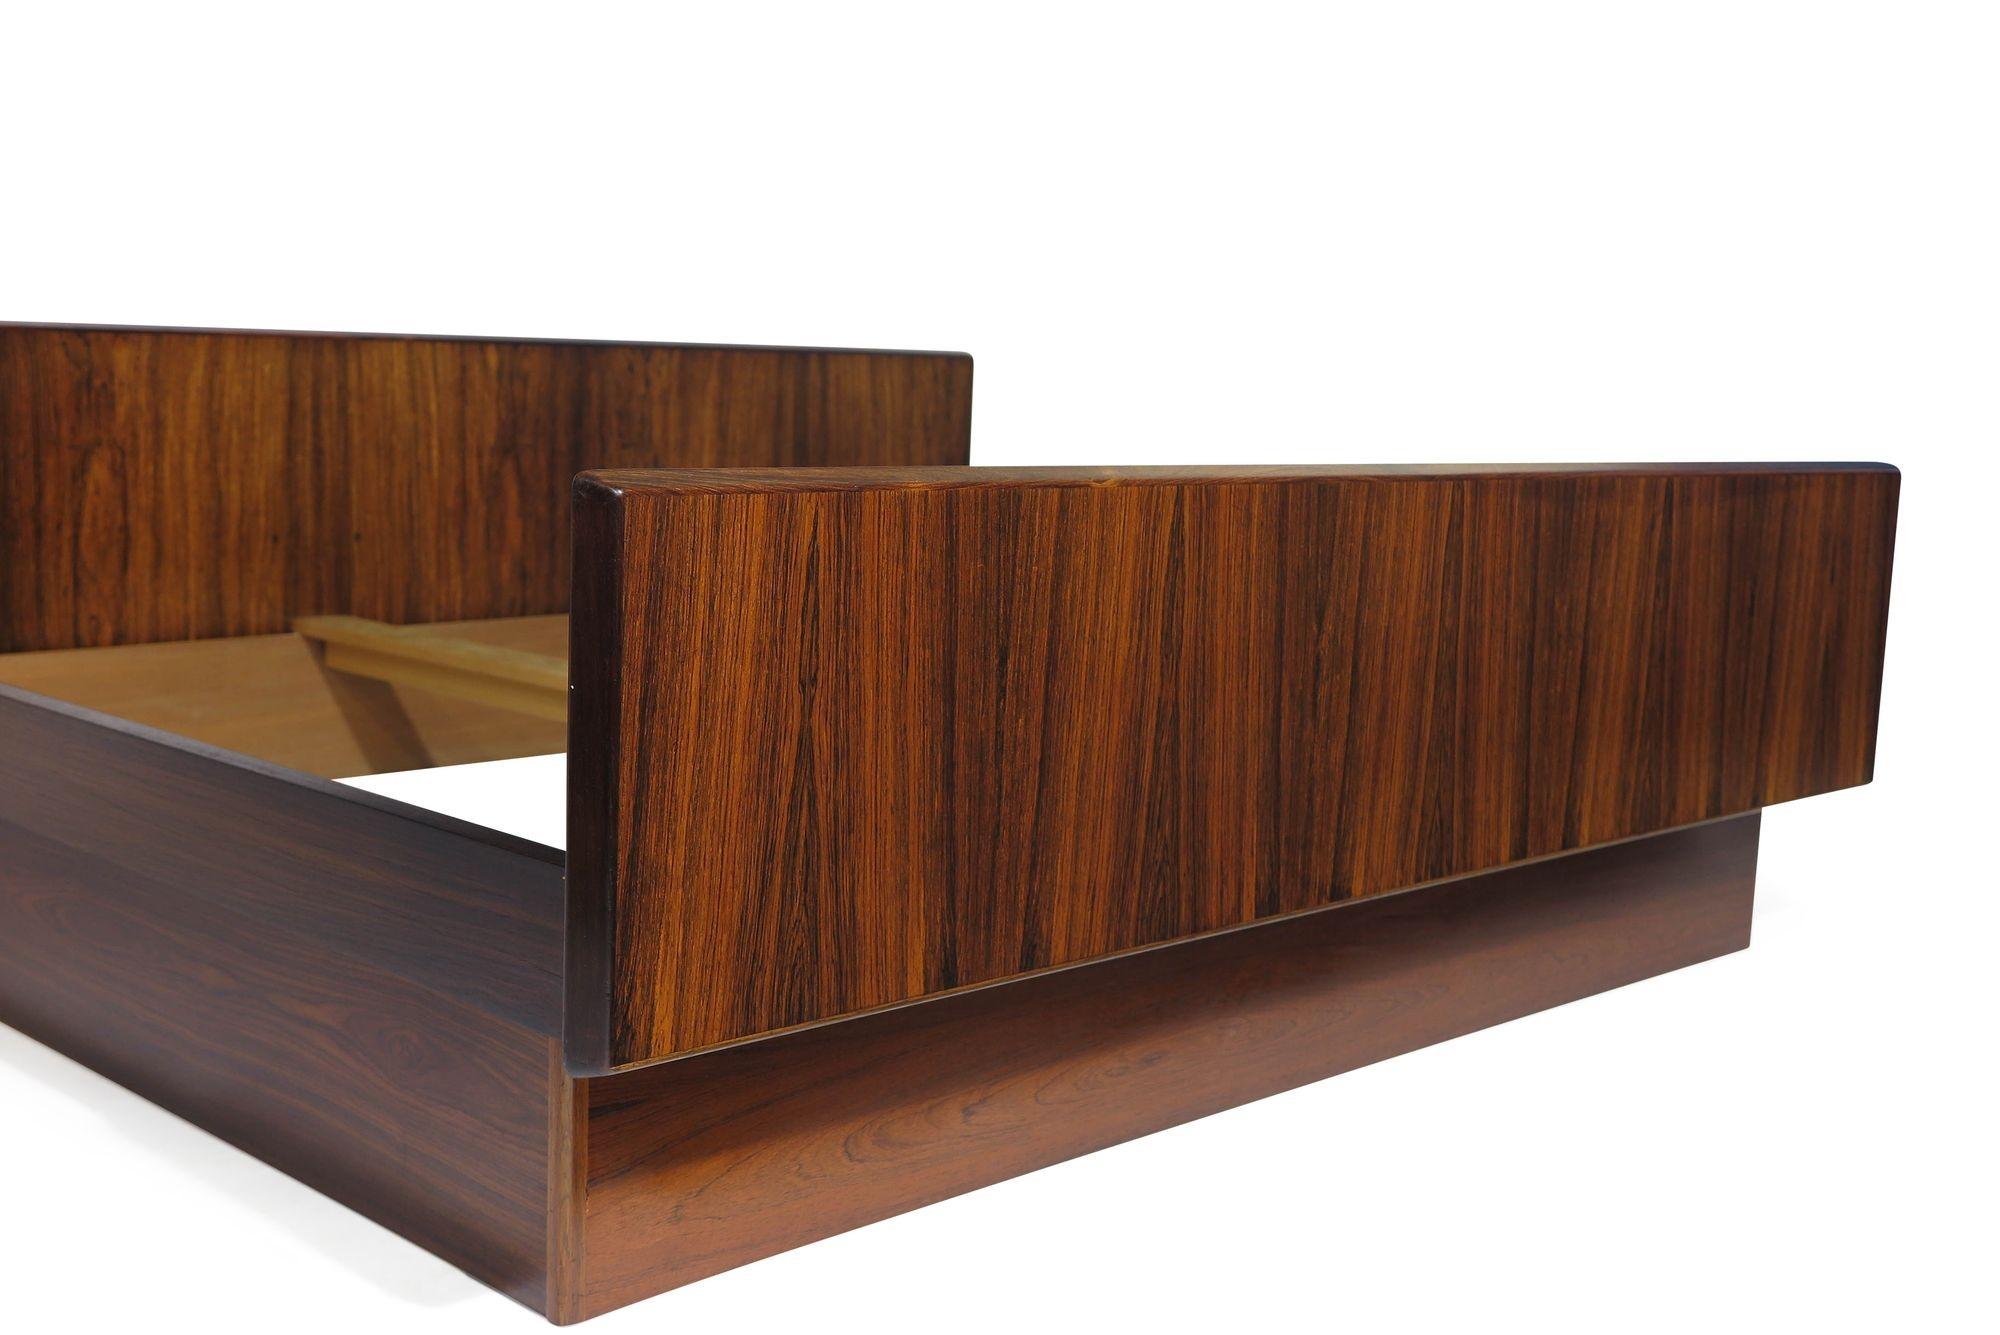 1950's Hans Olsen Danish bed-frame with floating nightstands crafted of Brazilian rosewood.
 
 
Dimensions: Headboard 104